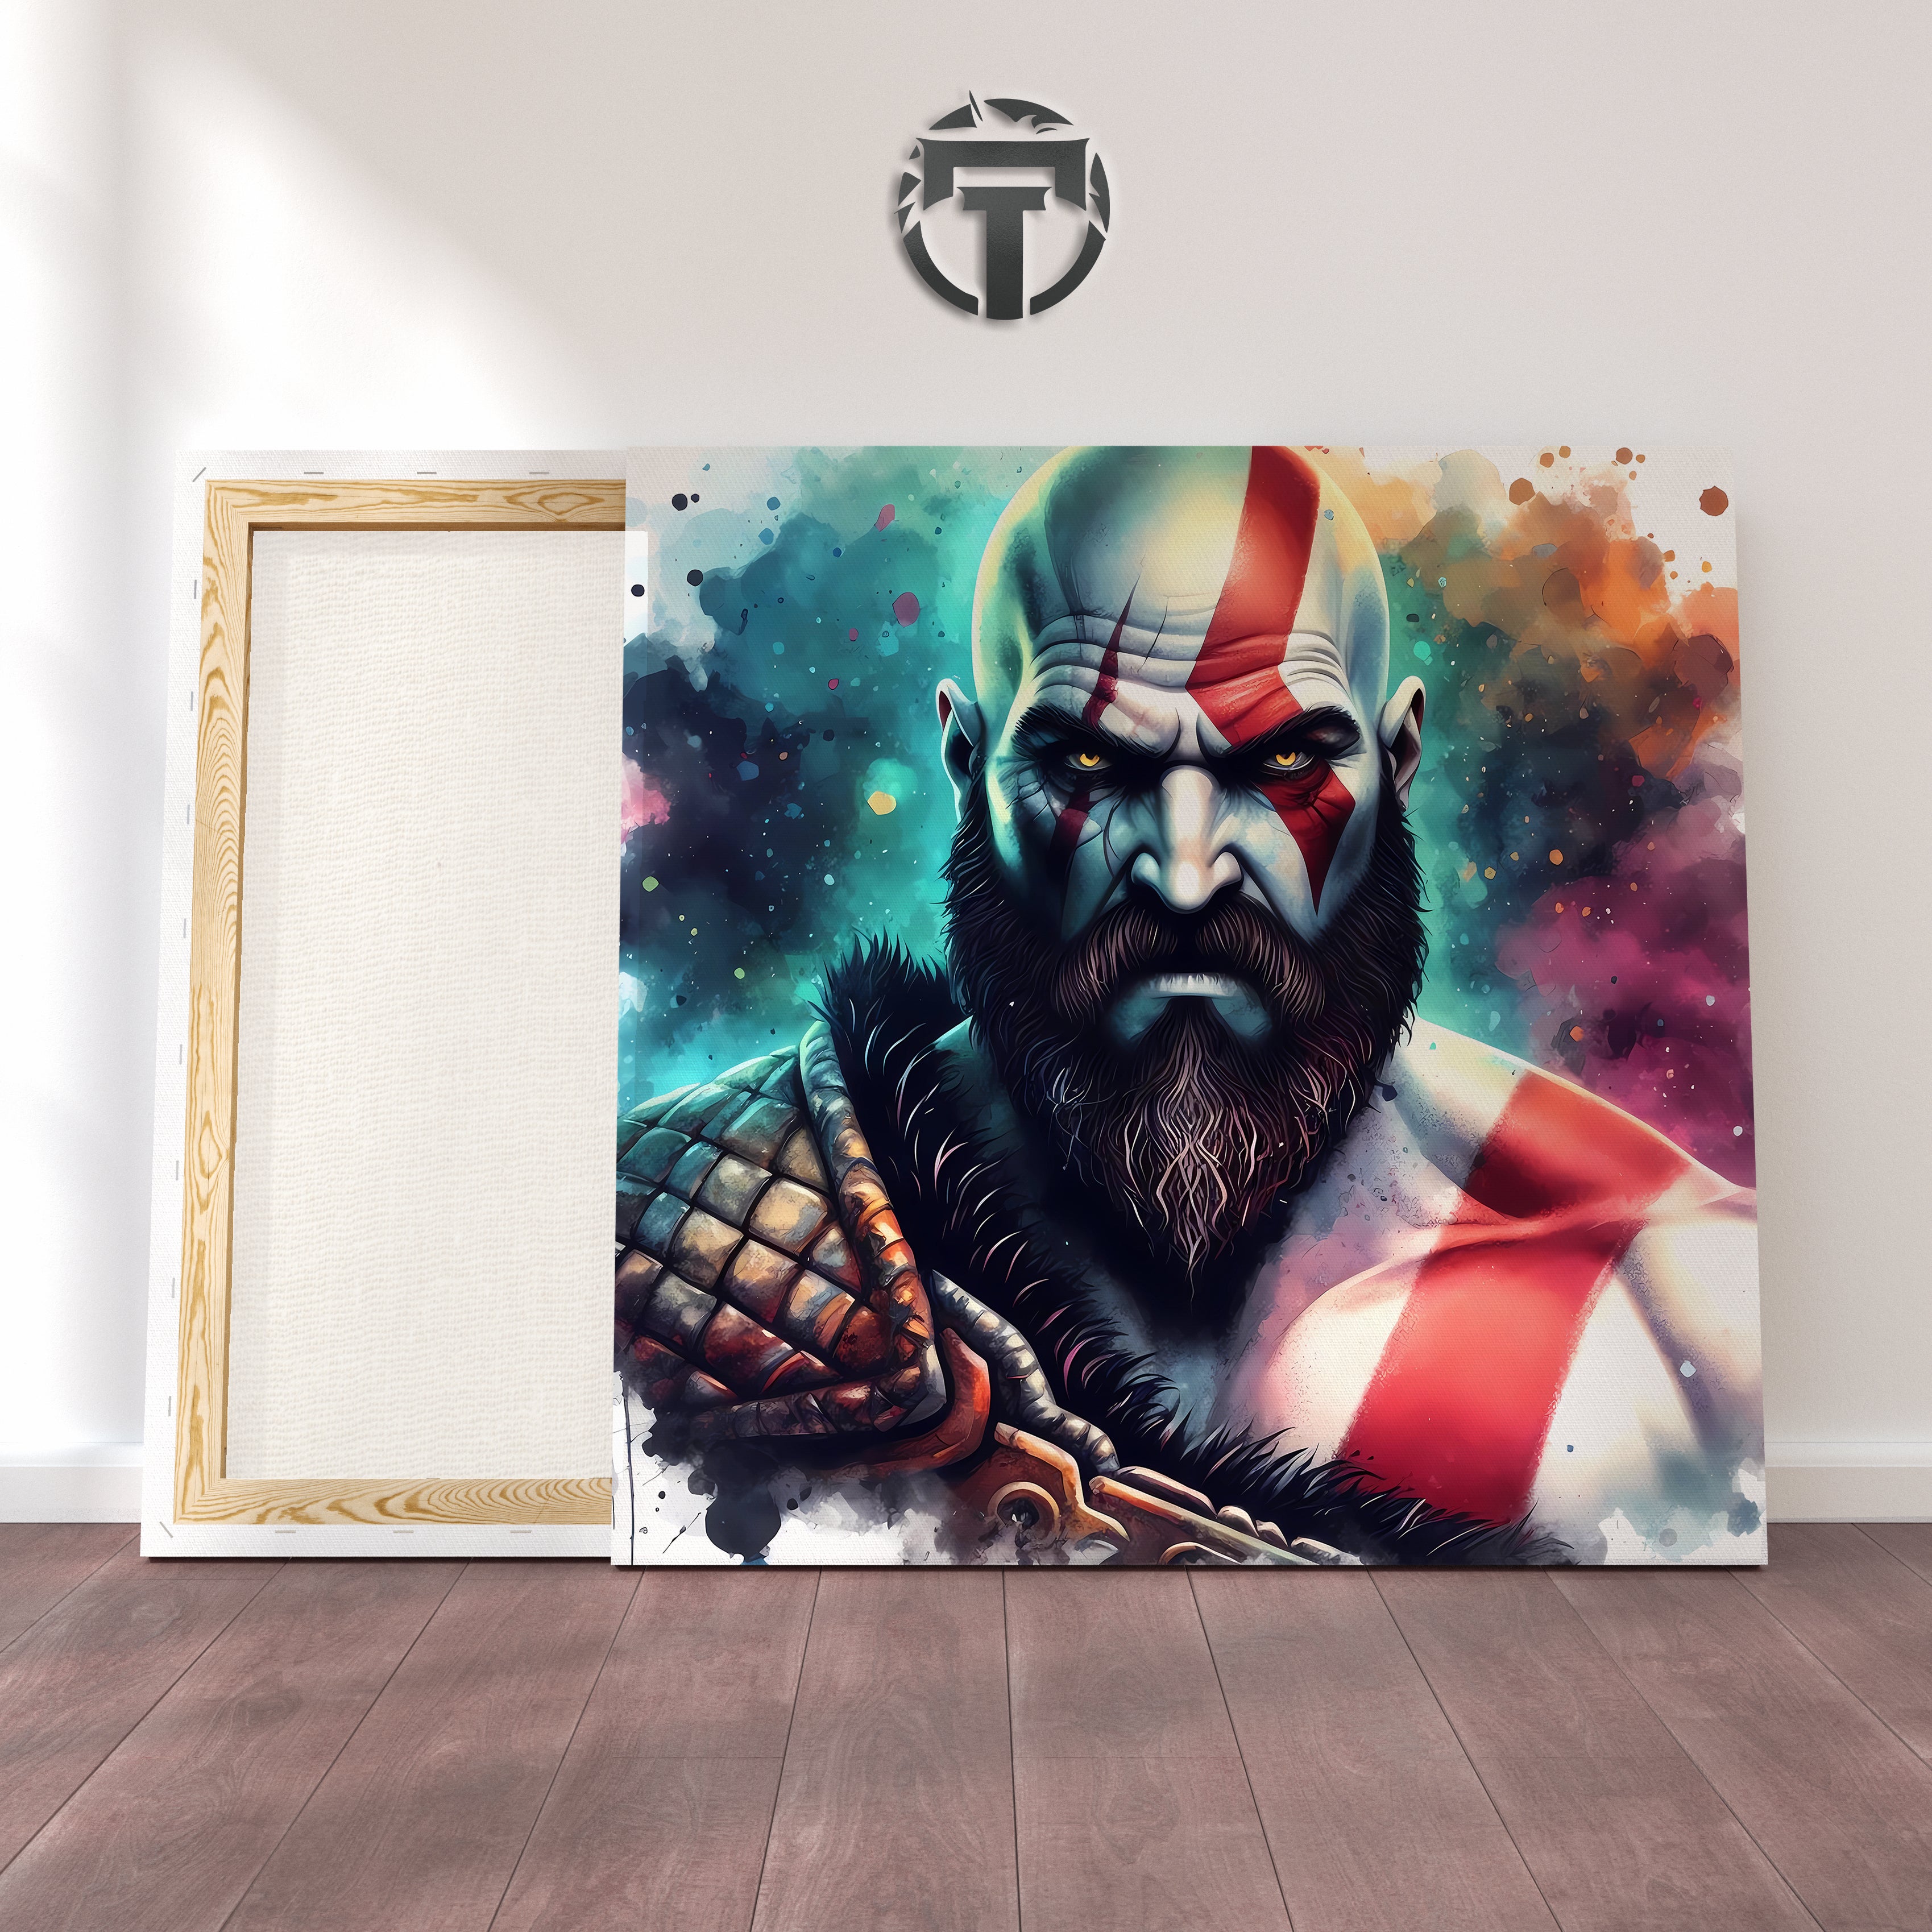 Kratos Canvas Wall Art: Unleash the Ghost of Sparta (God of War Portrait - Watercolor or Graphic)